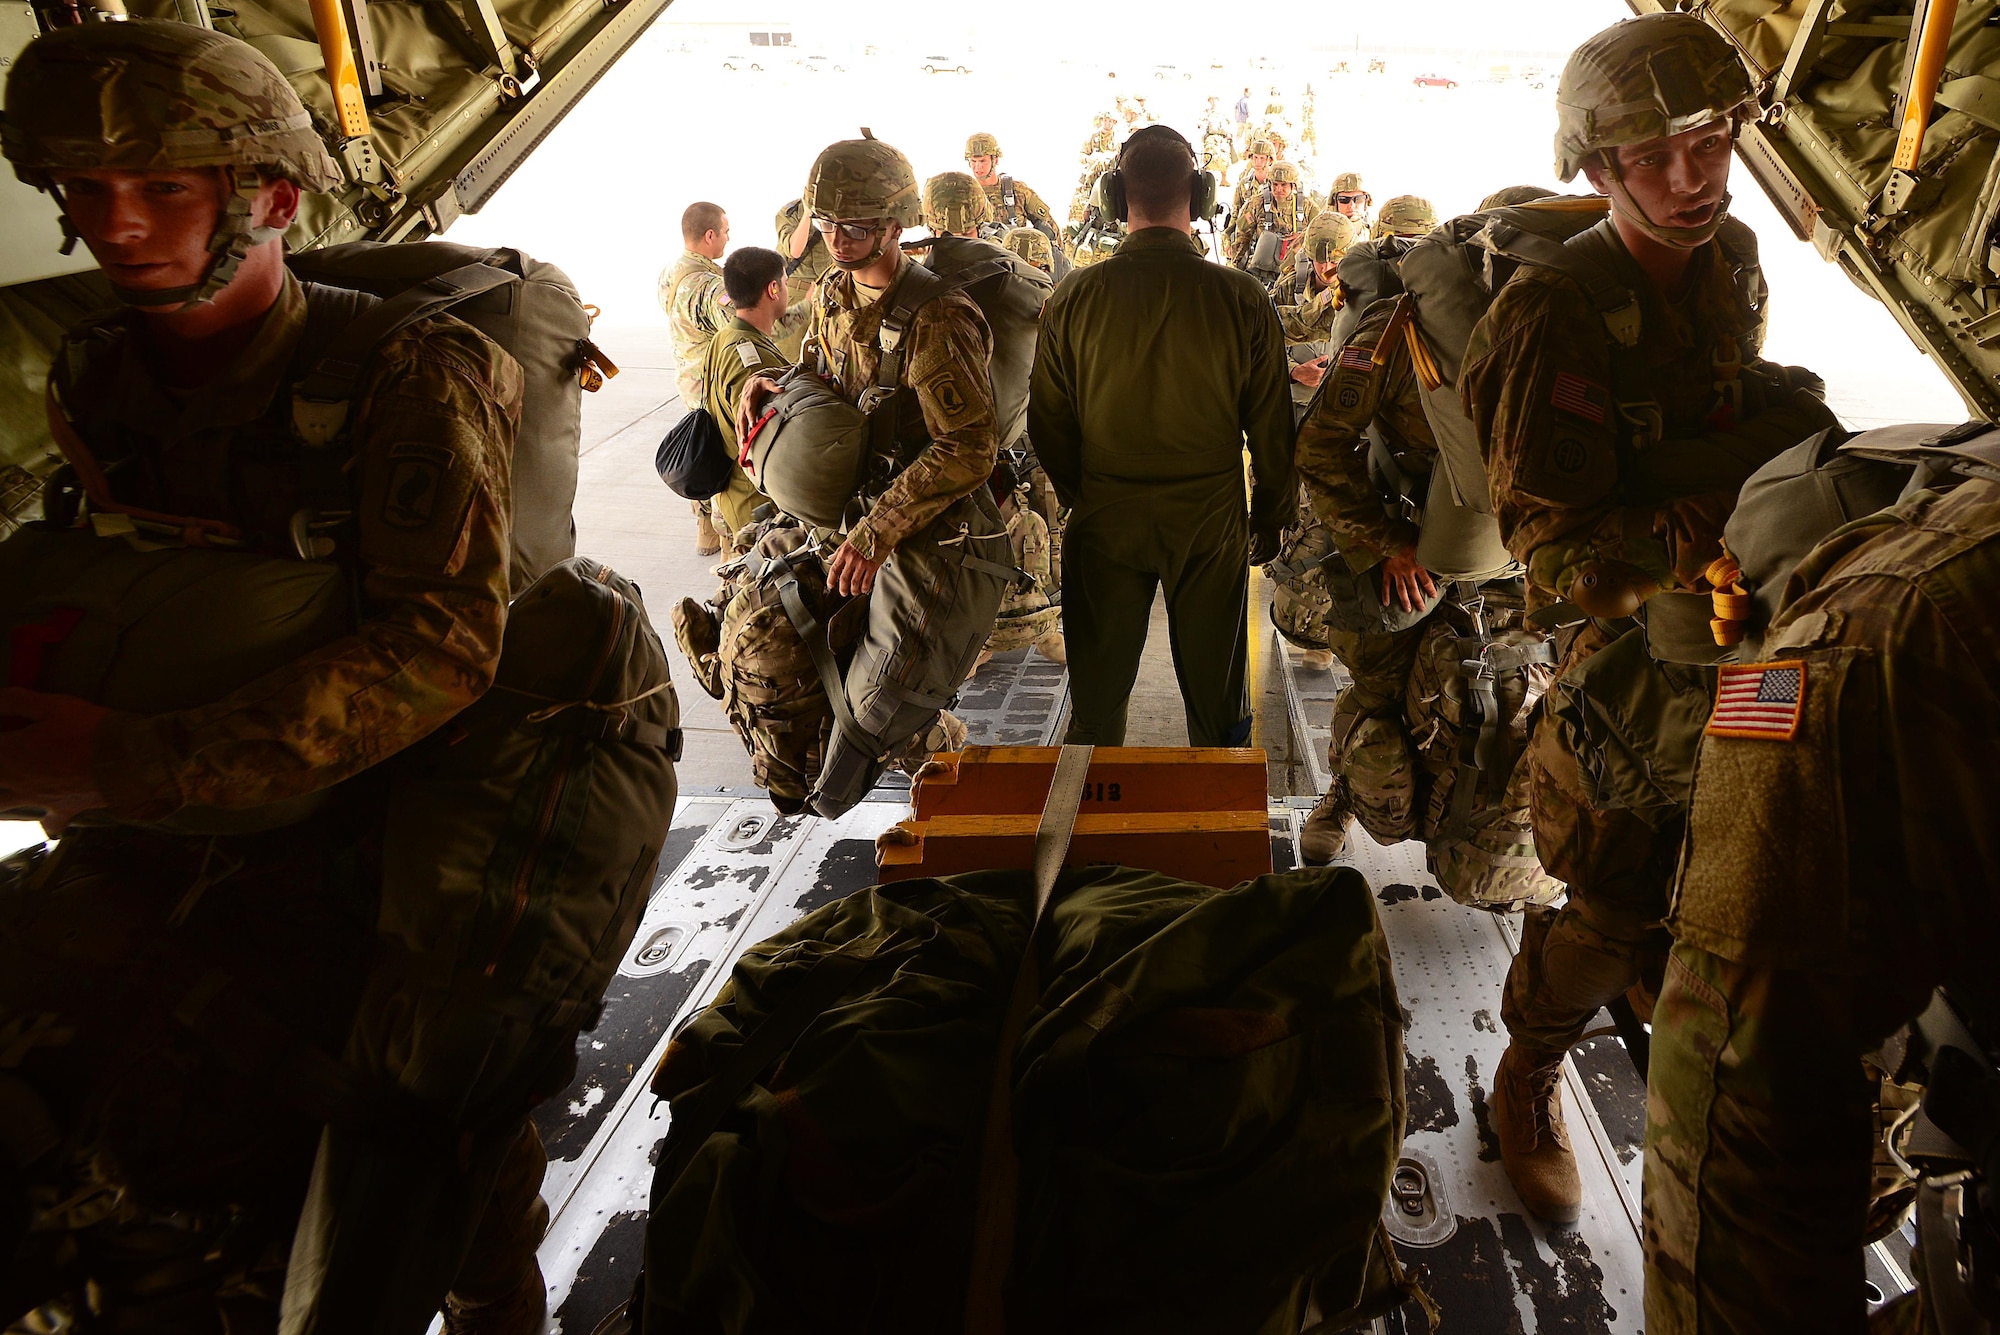 U.S. Army Air Cavalry attached to the 173rd Air Brigade from Vincenza, Italy board a C-130J Super Hercules assigned to the 37th Airlift Squadron, 86th Airlift Wing, Ramstein Air Base, Germany, prior to an airdrop sortie in support of exercise Juniper Falcon May 15, at Nevatim Air Force Base, Israel. Juniper Falcon 17 represents the combination of several bi-lateral component exercises with Israel Defense Forces that have been executed annually since 2011. These exercises were combined to increase joint training opportunities and capitalize on transportation and cost efficiencies gained by aggregating forces.   (U.S. Air Force photo/ Tech. Sgt. Matthew Plew)